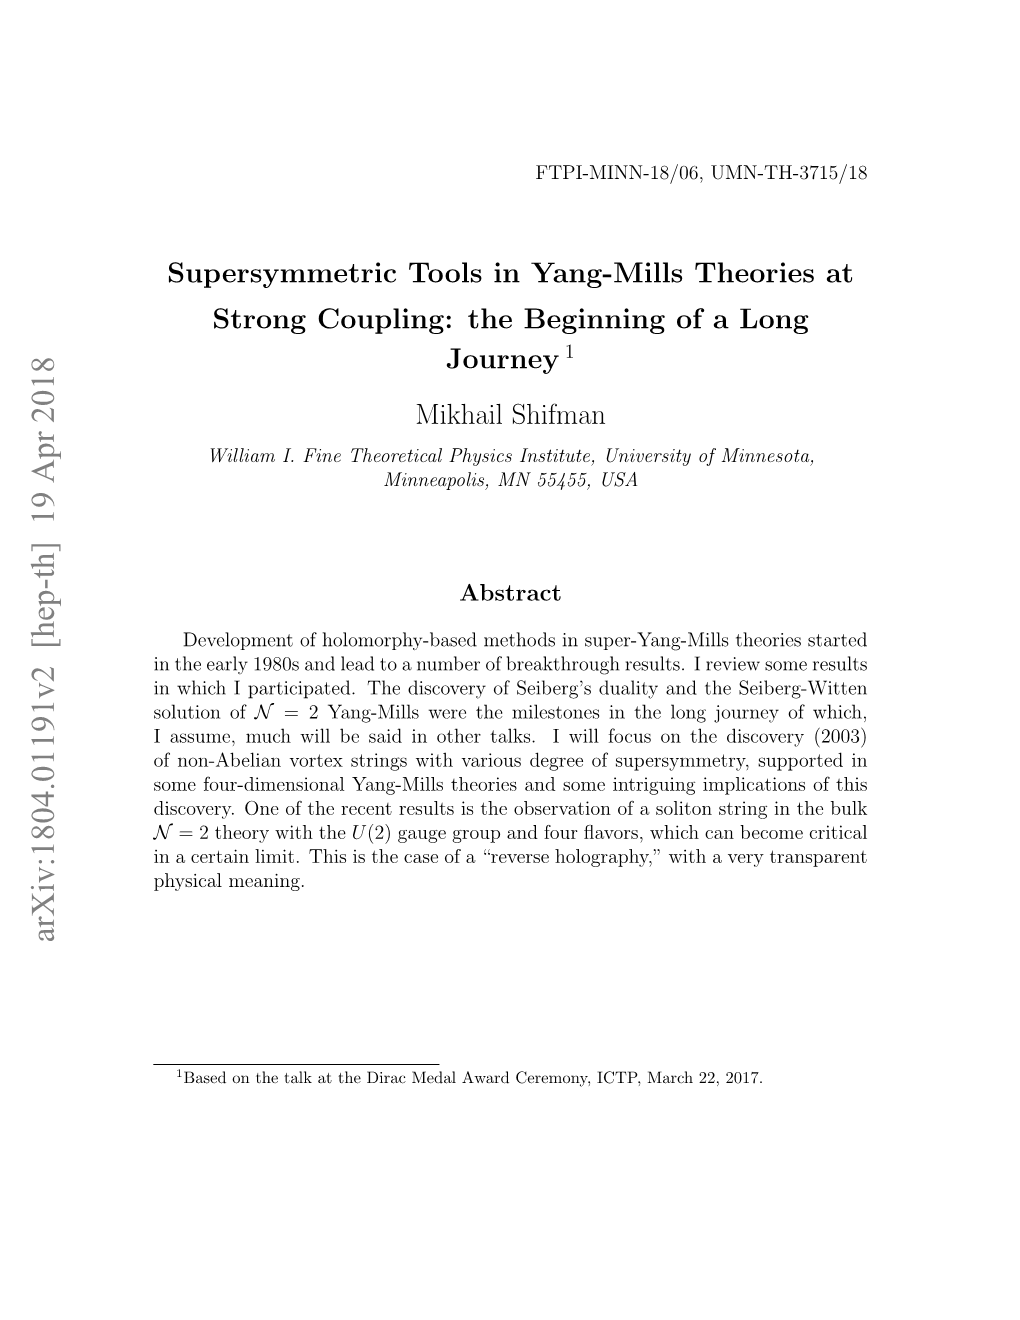 Supersymmetric Tools in Yang-Mills Theories at Strong Coupling: the Beginning of a Long Journey 1 Mikhail Shifman William I